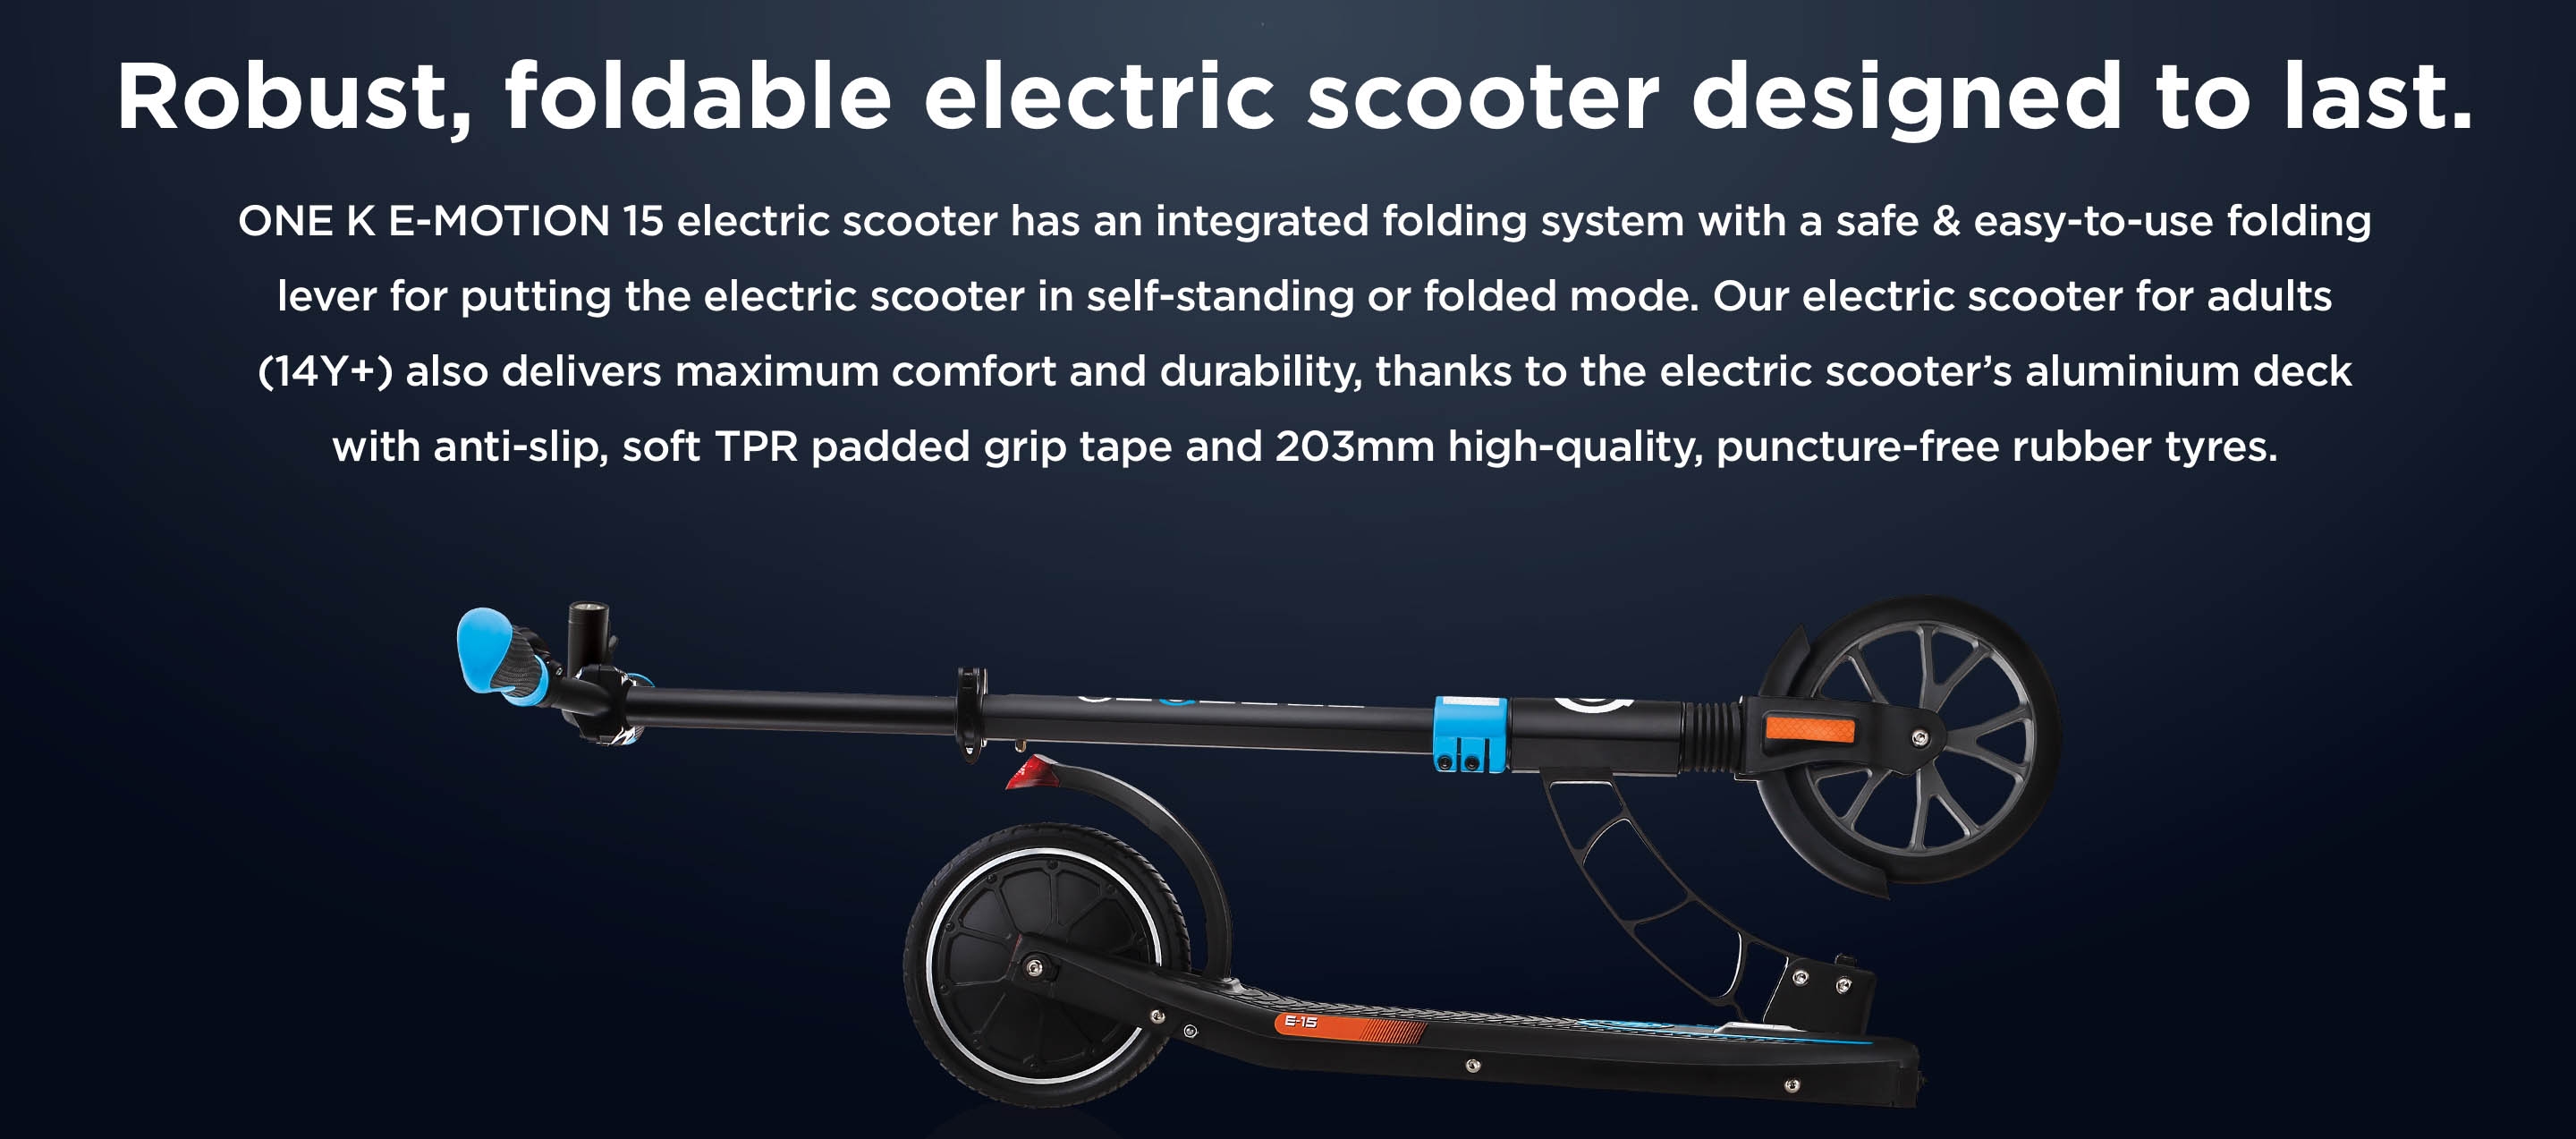 Robust, foldable electric scooter designed to last. ONE K E-MOTION 15 electric scooter has an integrated folding system with a safe & easy-to-use folding lever for putting the electric scooter in self-standing or folded mode. Our electric scooter for adults (14Y+) also delivers maximum comfort and durability, thanks to the electric scooter’s aluminium deck with anti-slip, soft TPR padded grip tape and 203mm high-quality, puncture-free rubber tyres.